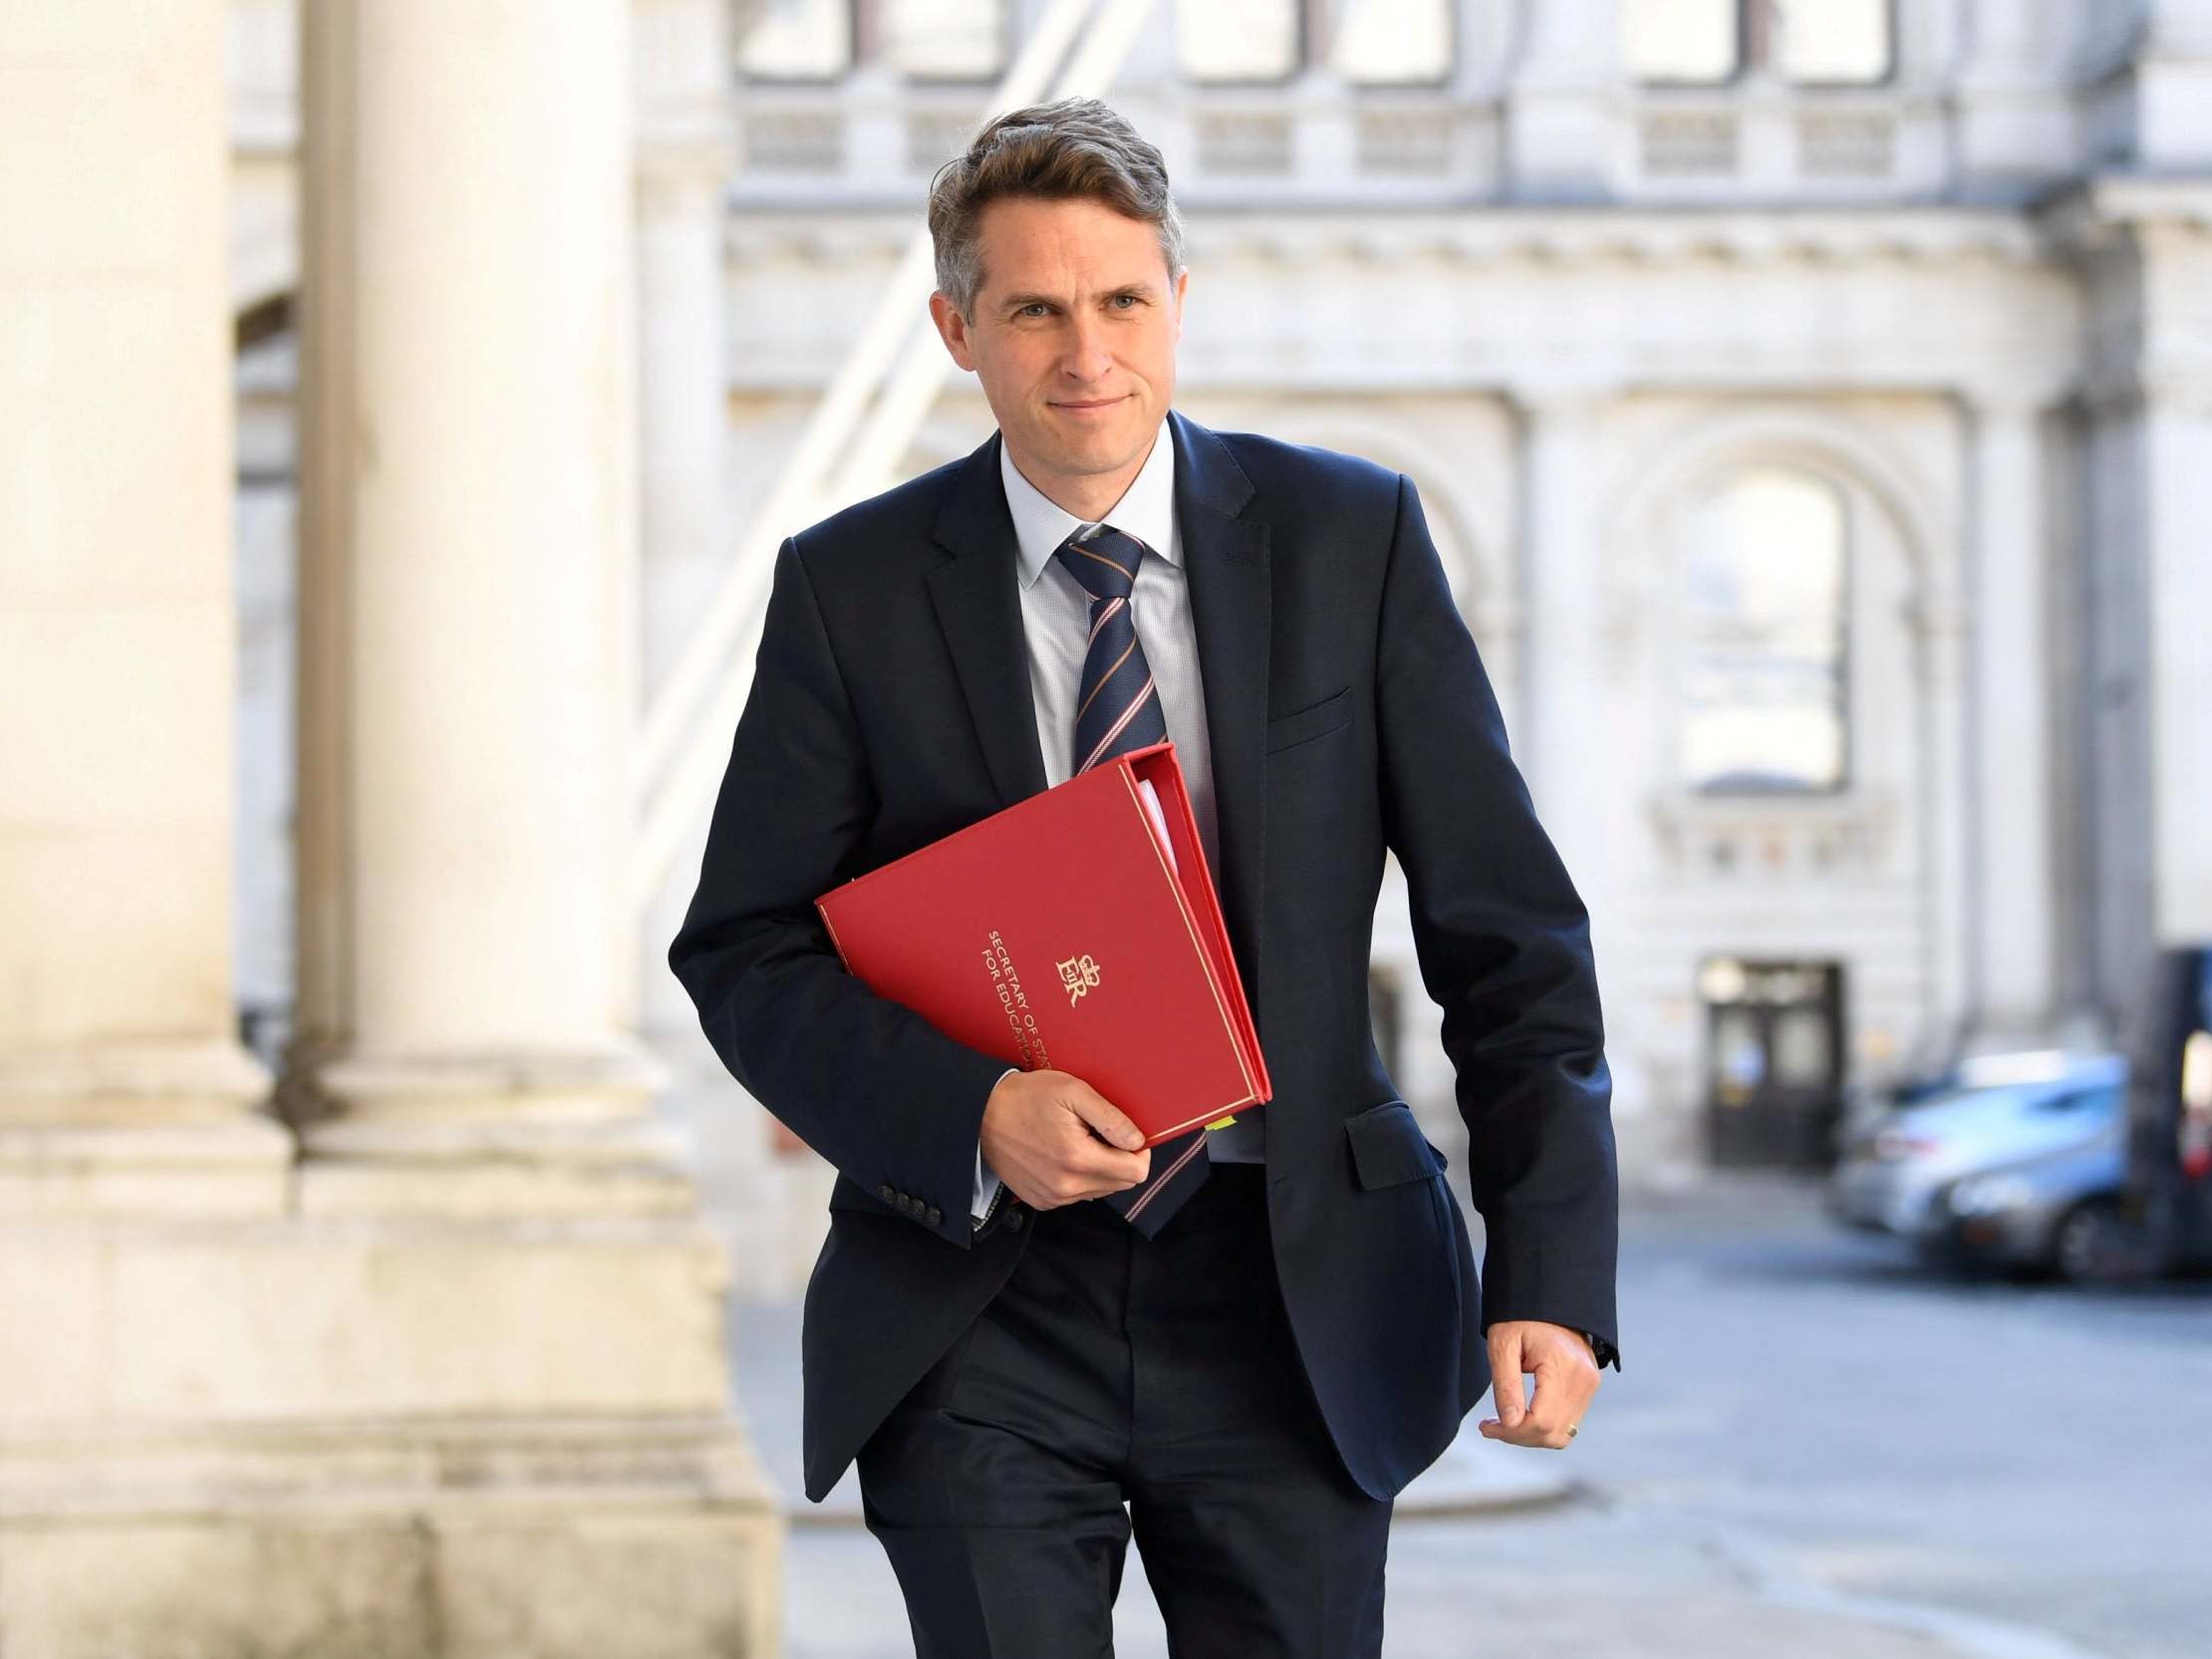 A-level results: Gavin Williamson facing backlash over grading system as private schools see biggest increase in top grades